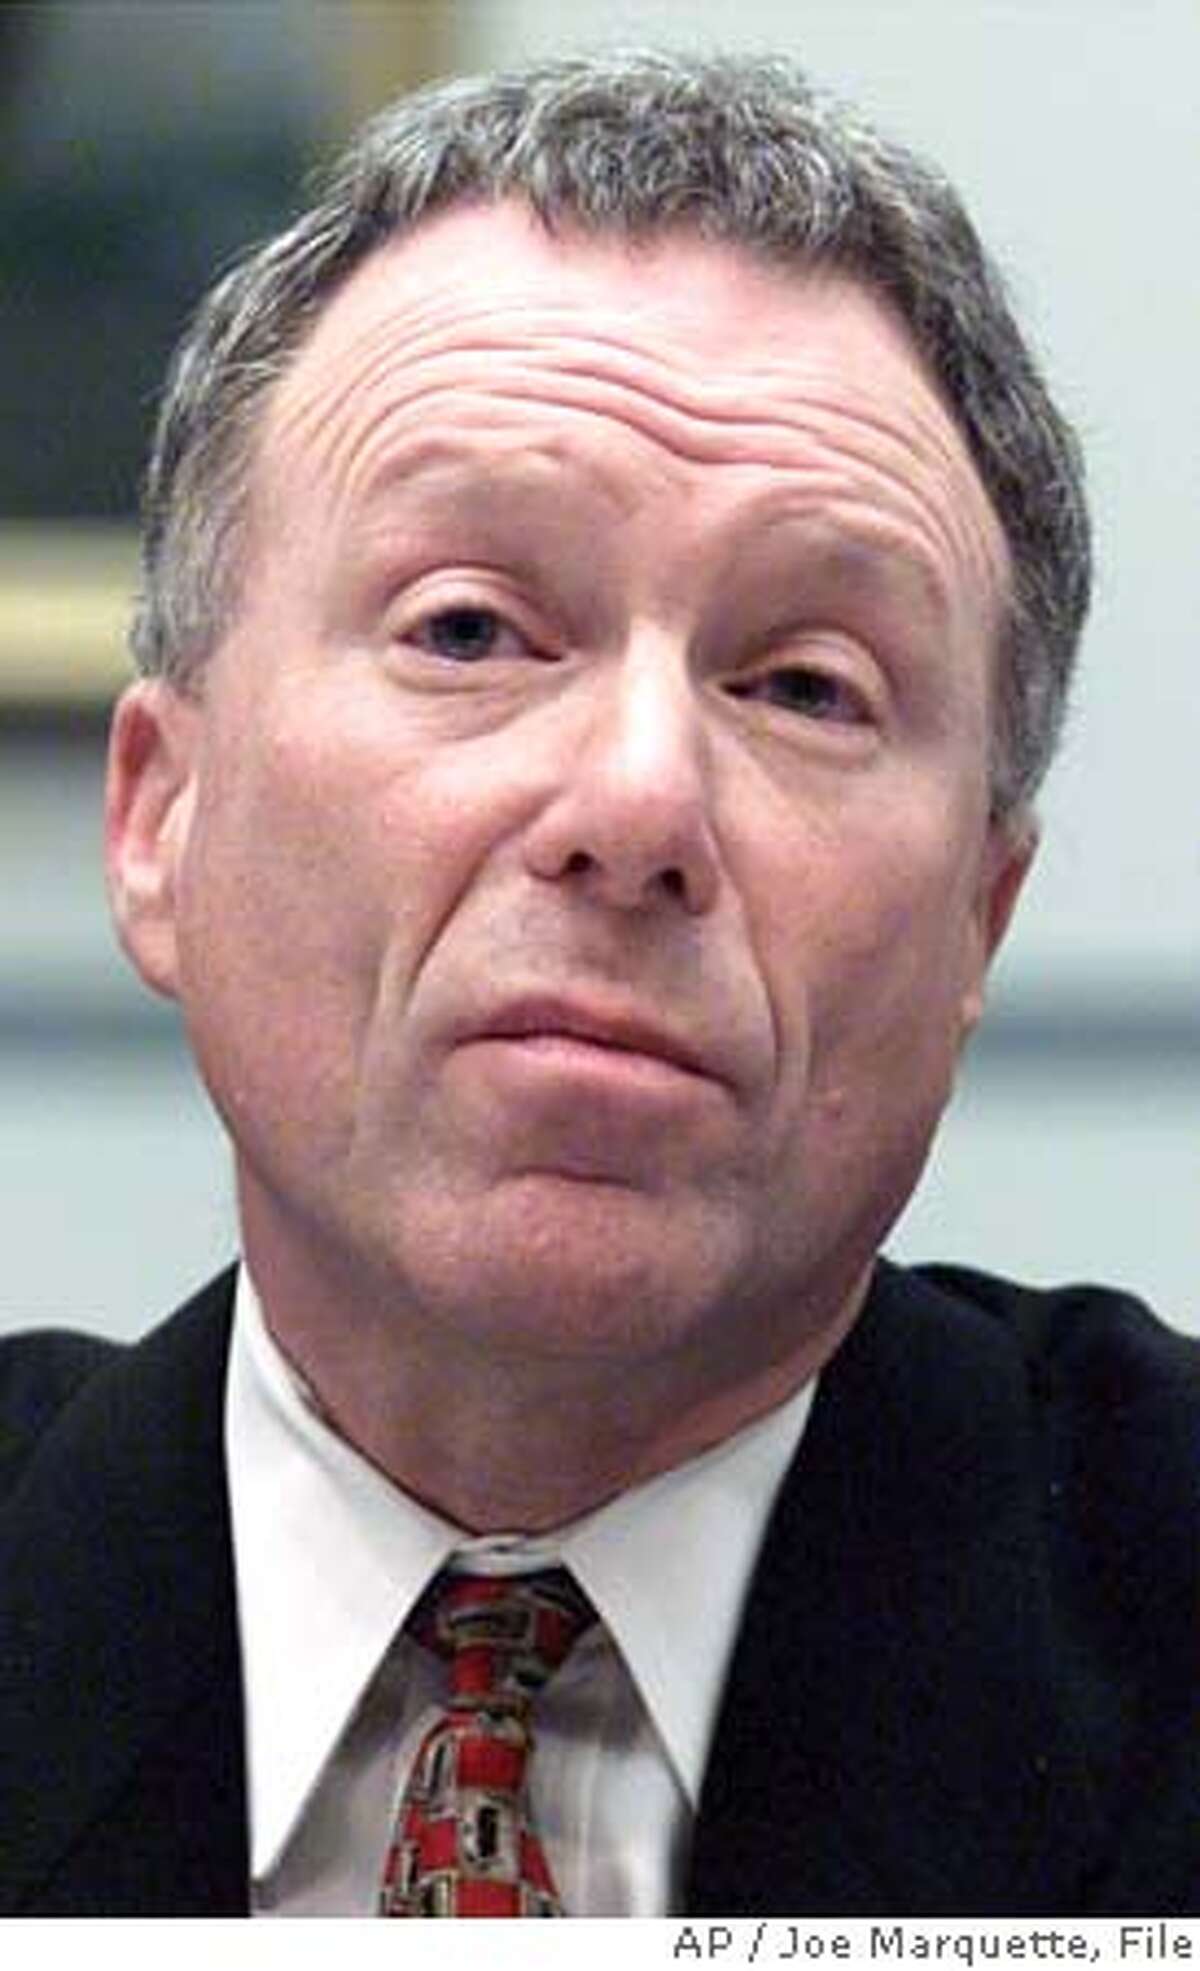 ** FILE ** Lewis Libby, Vice President Cheney's chief of staff, testifies on Capitol Hill in Washington in this March 1, 2001 file photo. (AP Photo/Joe Marquette, File) Ran on: 10-17-2005 Judith Miller Ran on: 10-17-2005 A MARCH 1, 2001 FILE PHOTO